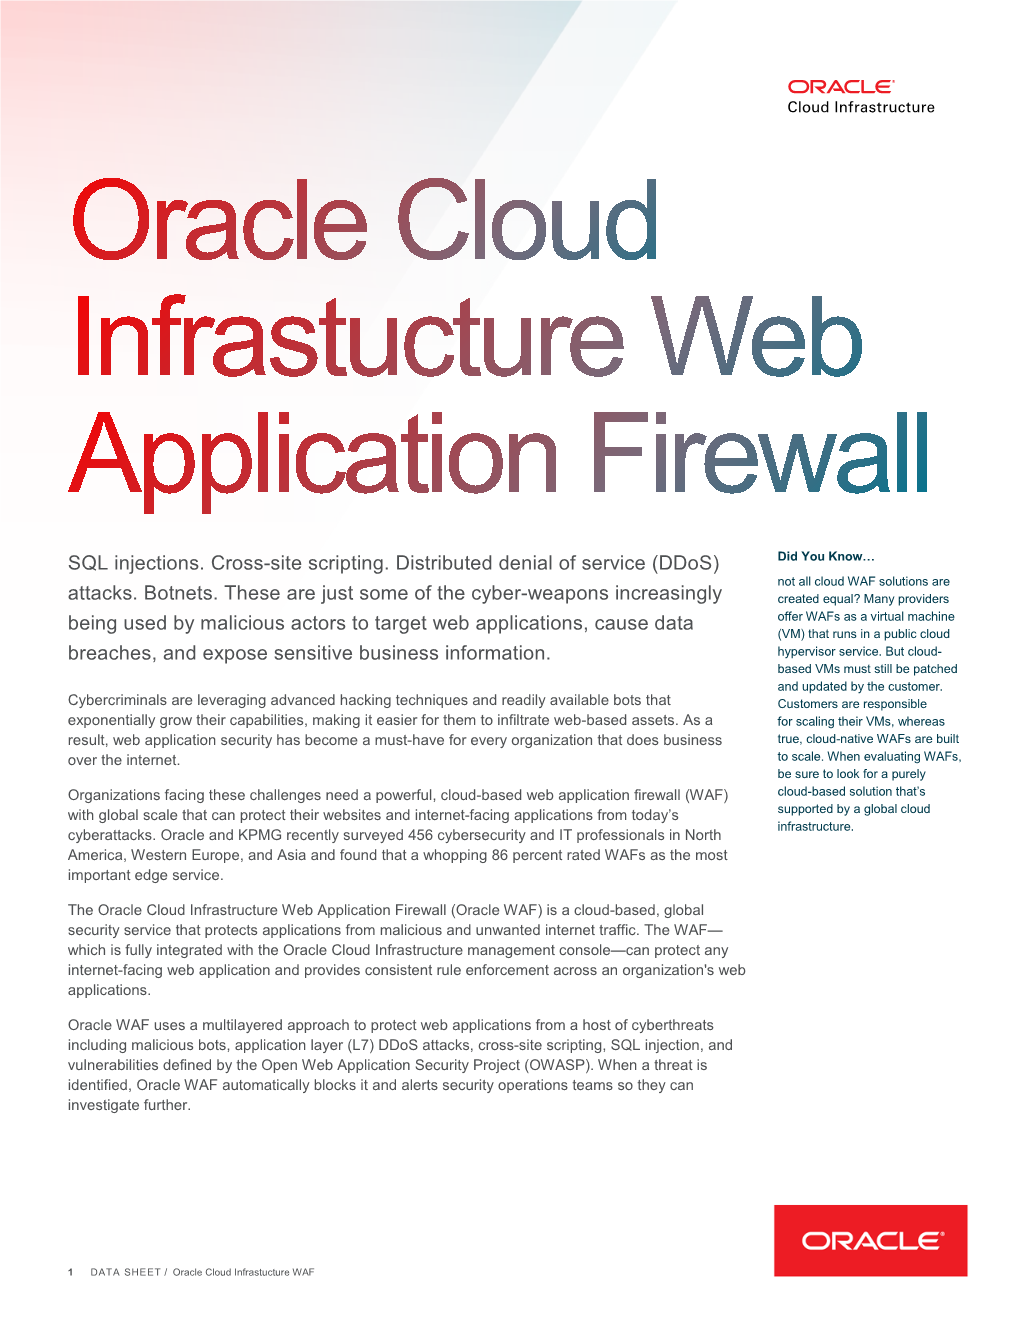 Oracle Cloud Infrastructure Web Application Firewall